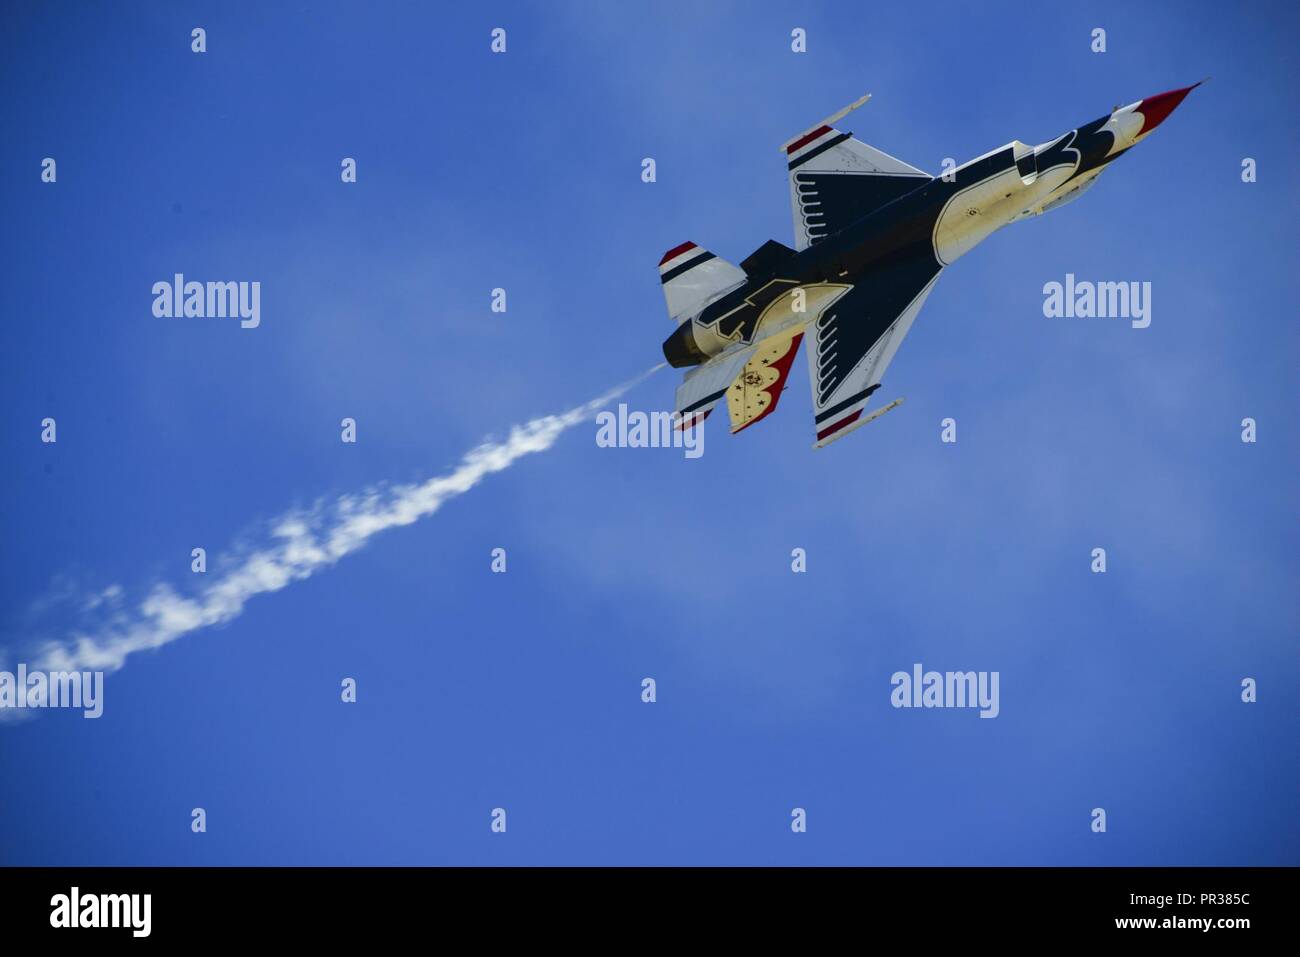 One of the U.S. Air Force Aerial Demonstration Squadron “Thunderbirds” flies in formation during SkyFest 2017 Air Show and Open House at Fairchild Air Force Base, Washington, July 30, 2017. SkyFest was an opportunity to give the local and regional community a chance to view Airmen and our resources. Stock Photo